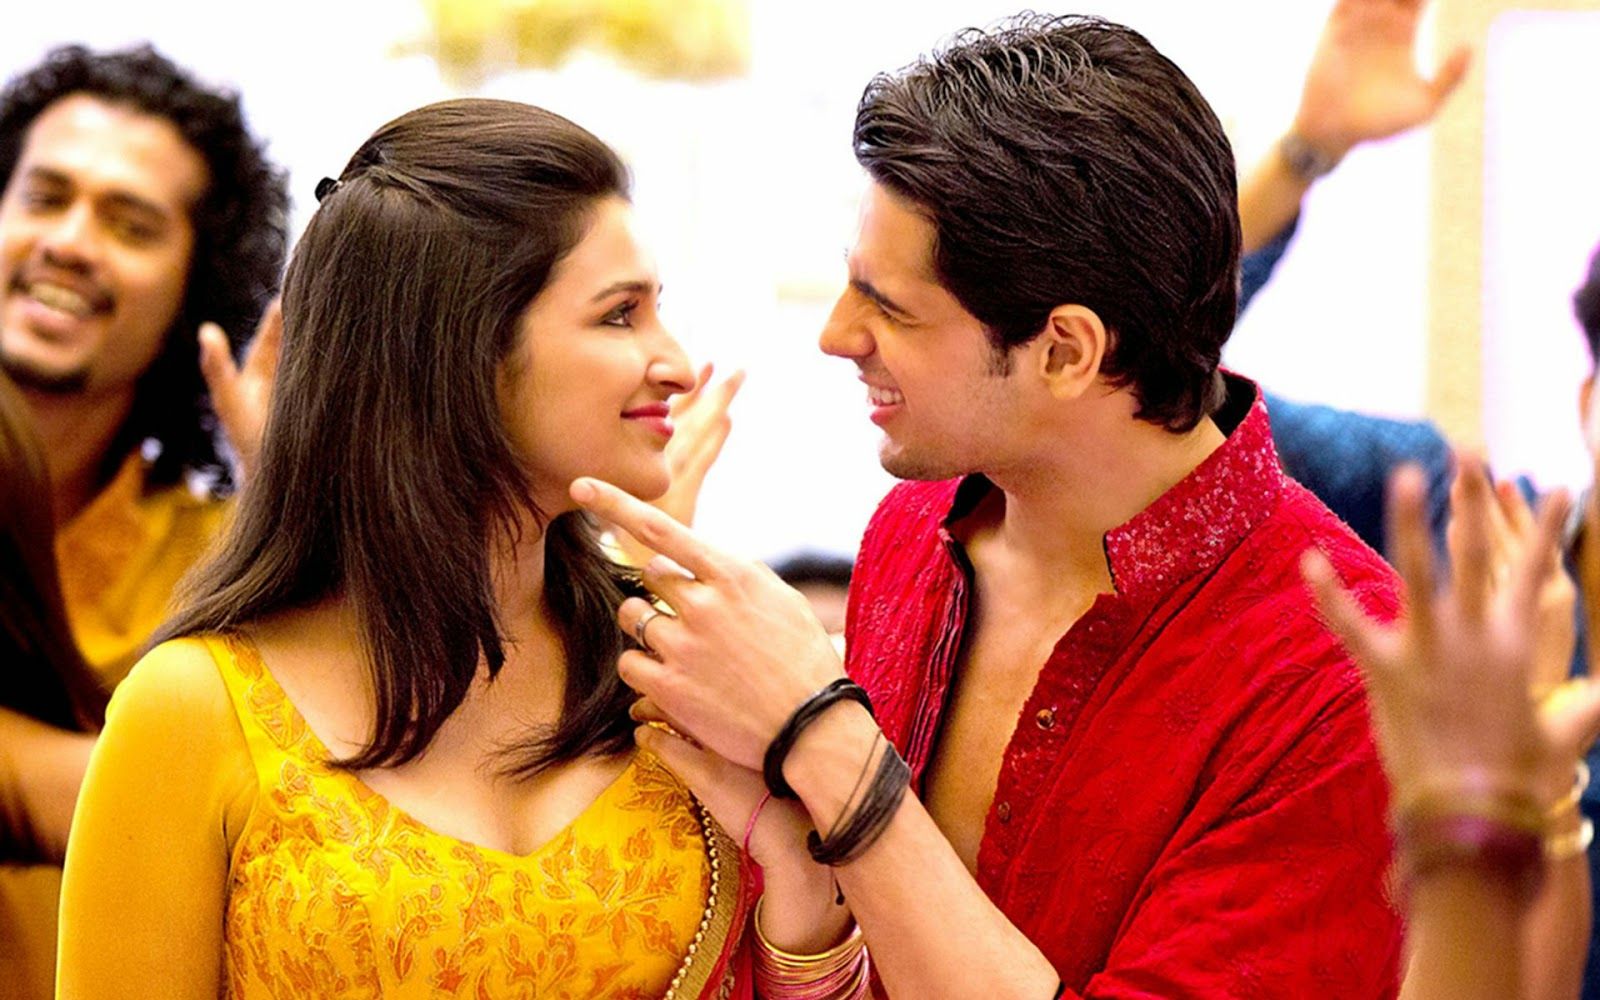 watch hasee toh phasee online hd